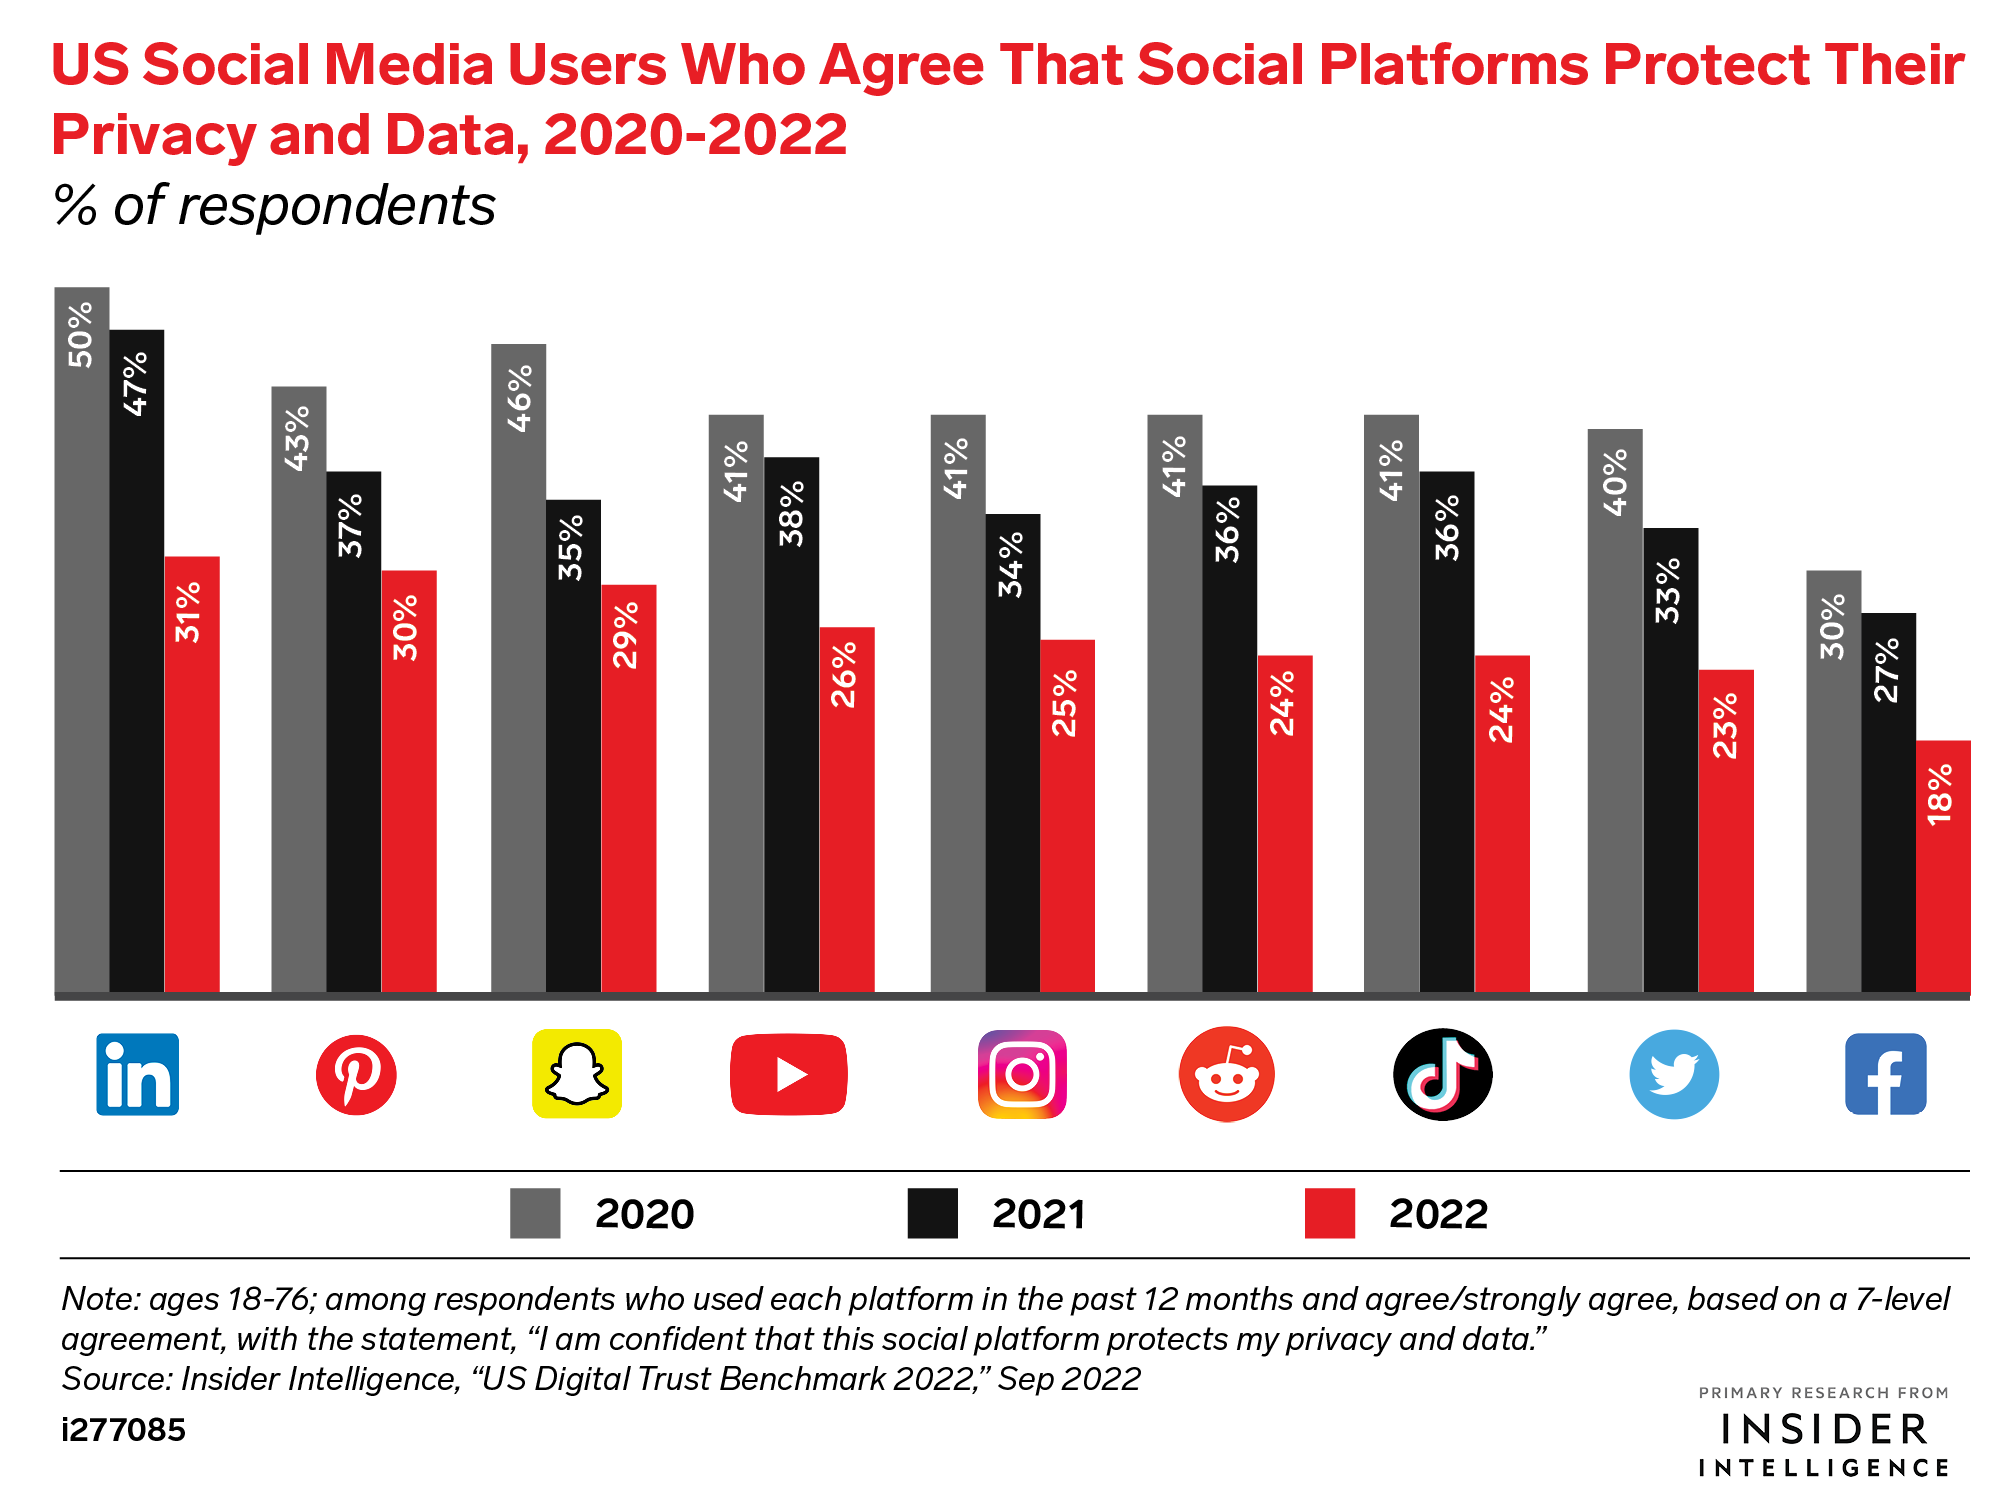 chart showing a 3-year comparison of the number of social media users who agree that different social networks protect their privacy and data